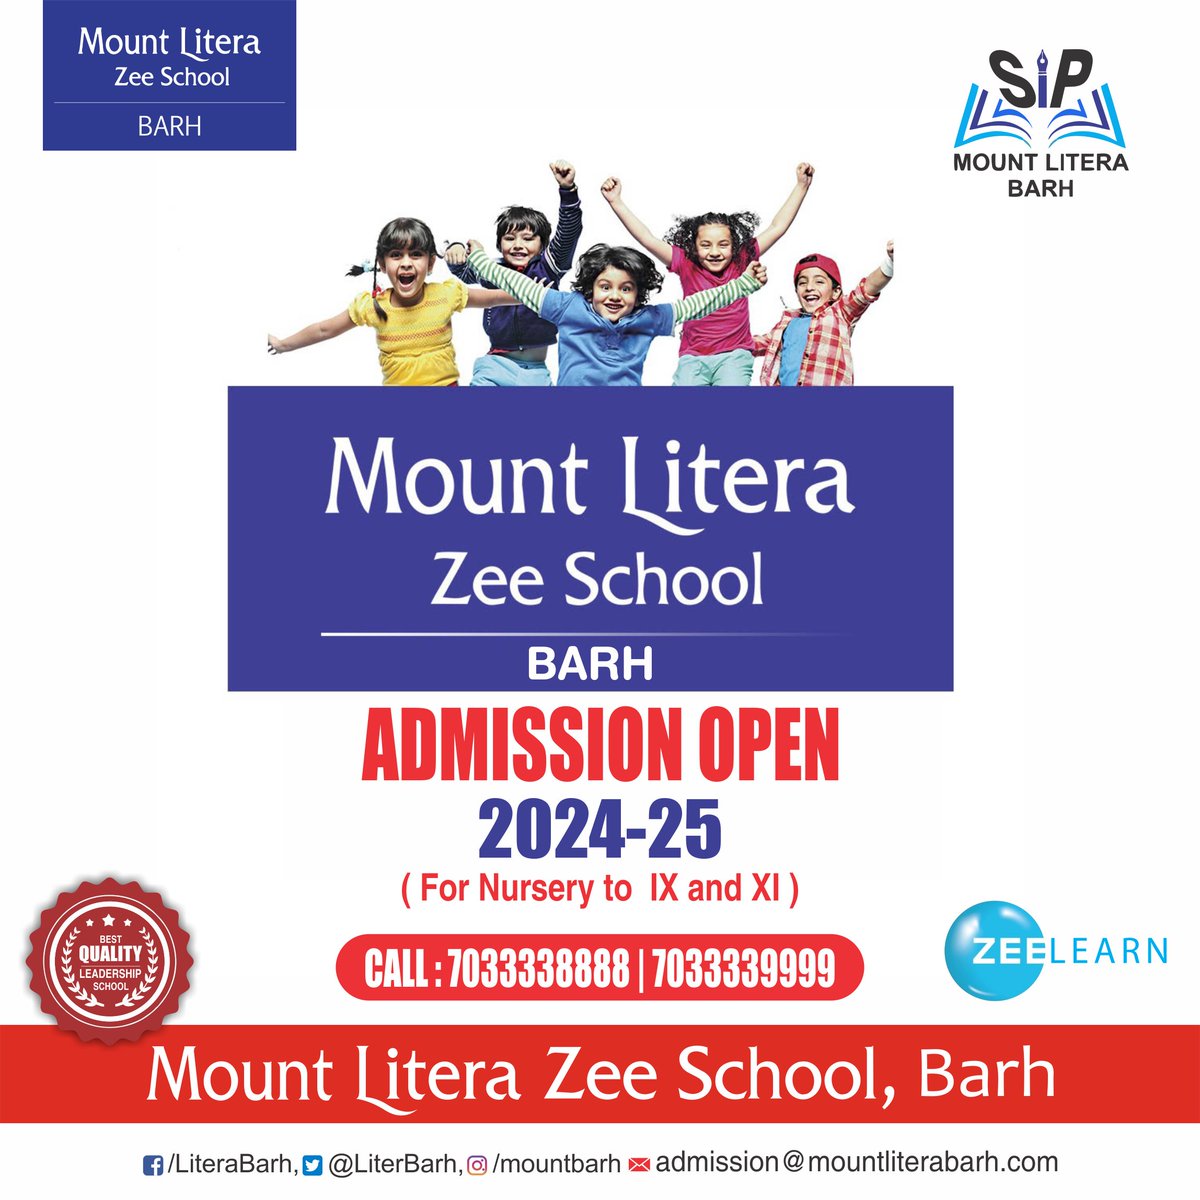 ✨✨𝐀𝐝𝐦𝐢𝐬𝐬𝐢𝐨𝐧𝐬 𝐎𝐩𝐞𝐧 𝐅𝐨𝐫 𝟐𝟎𝟐𝟒-𝟐𝟎𝟐𝟓 ✨✨ Choose Mount Litera Zee School Barh for your child's bright future. Grab your chance to study in one of the best school chains in the country.